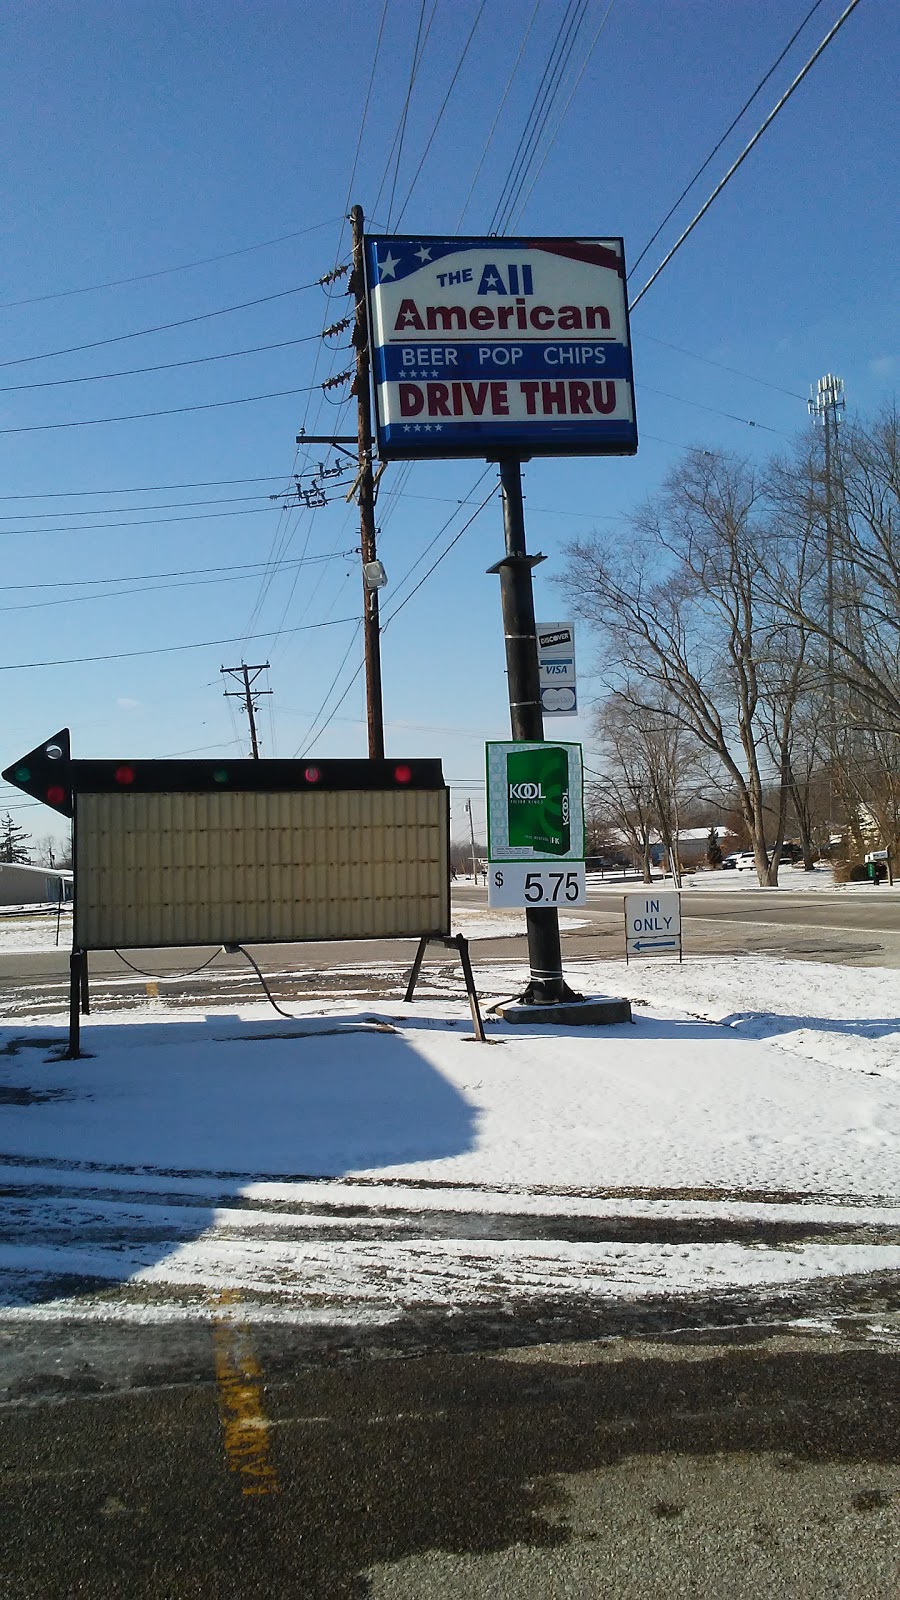 The All American Drive Thru | 5979 E US Highway 22 and 3, Morrow, OH 45152 | Phone: (513) 899-7074